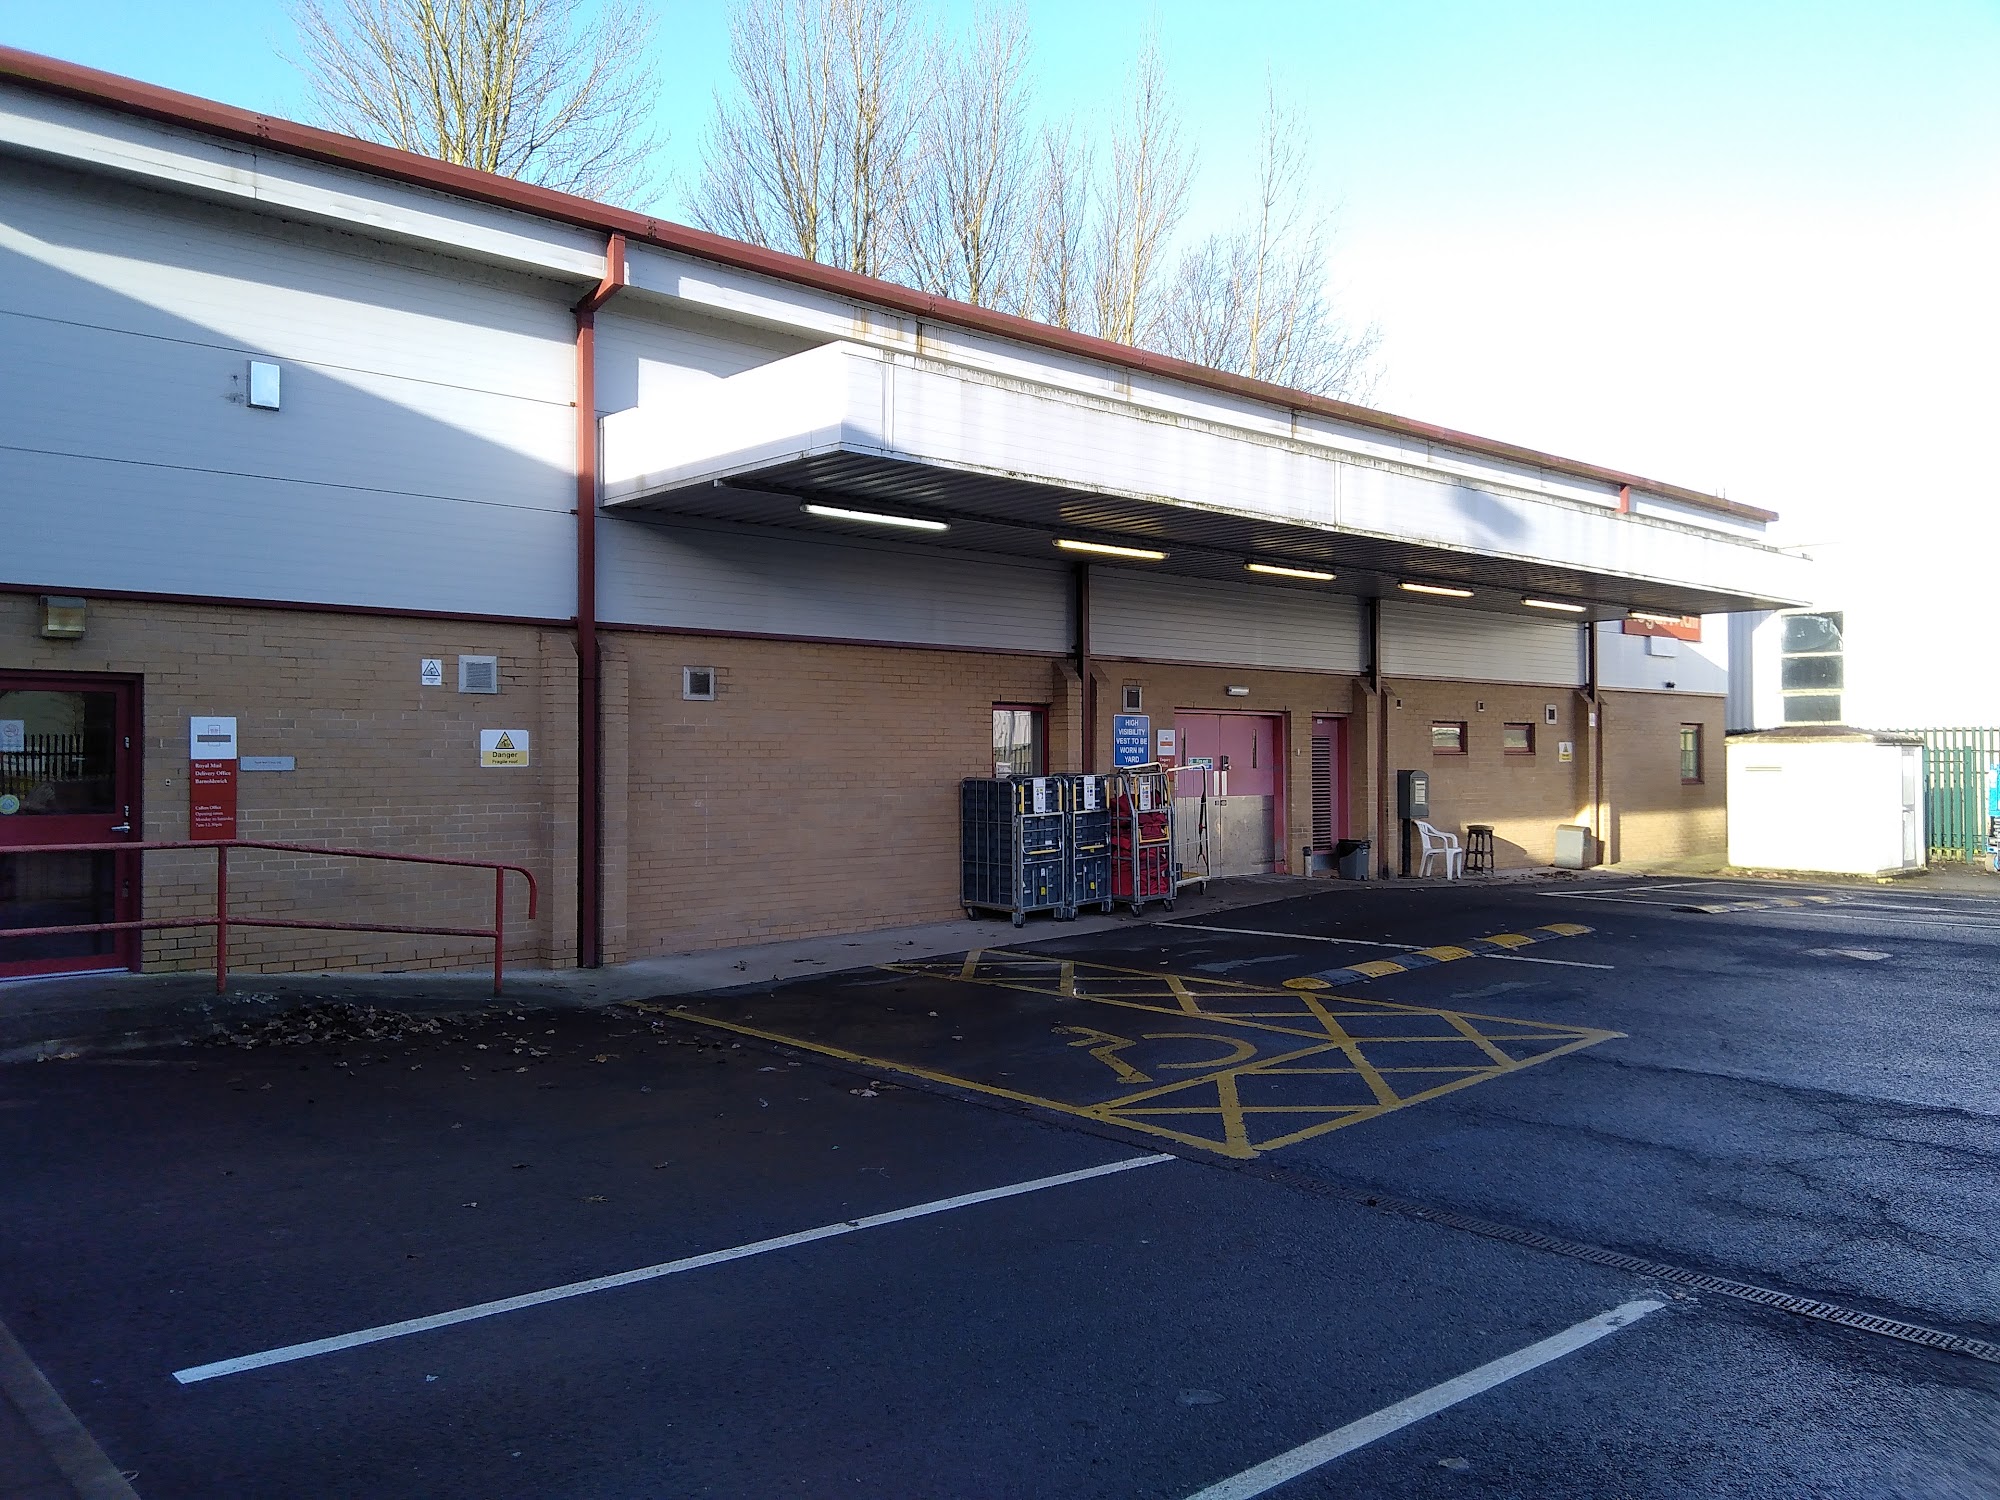 Royal Mail - Barnoldswick Delivery Office